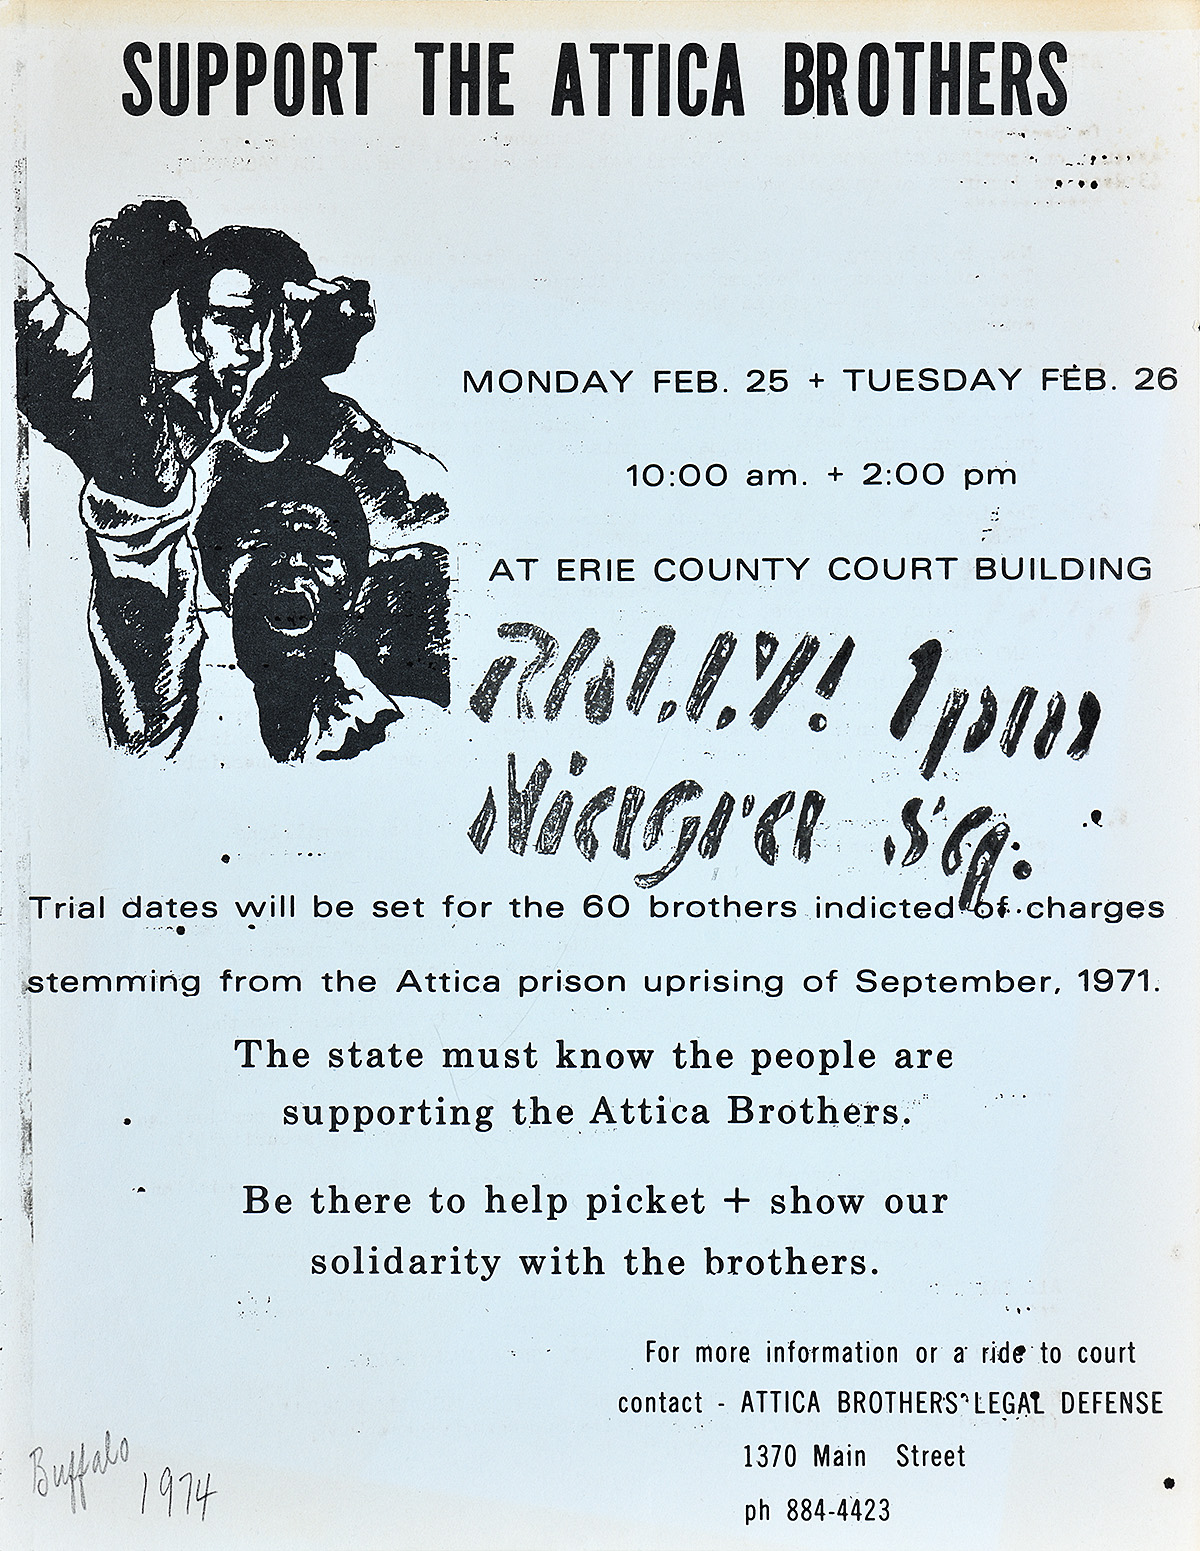 A handbill of rally information next to an illustrational image of 2 Black men with their fists in the air.